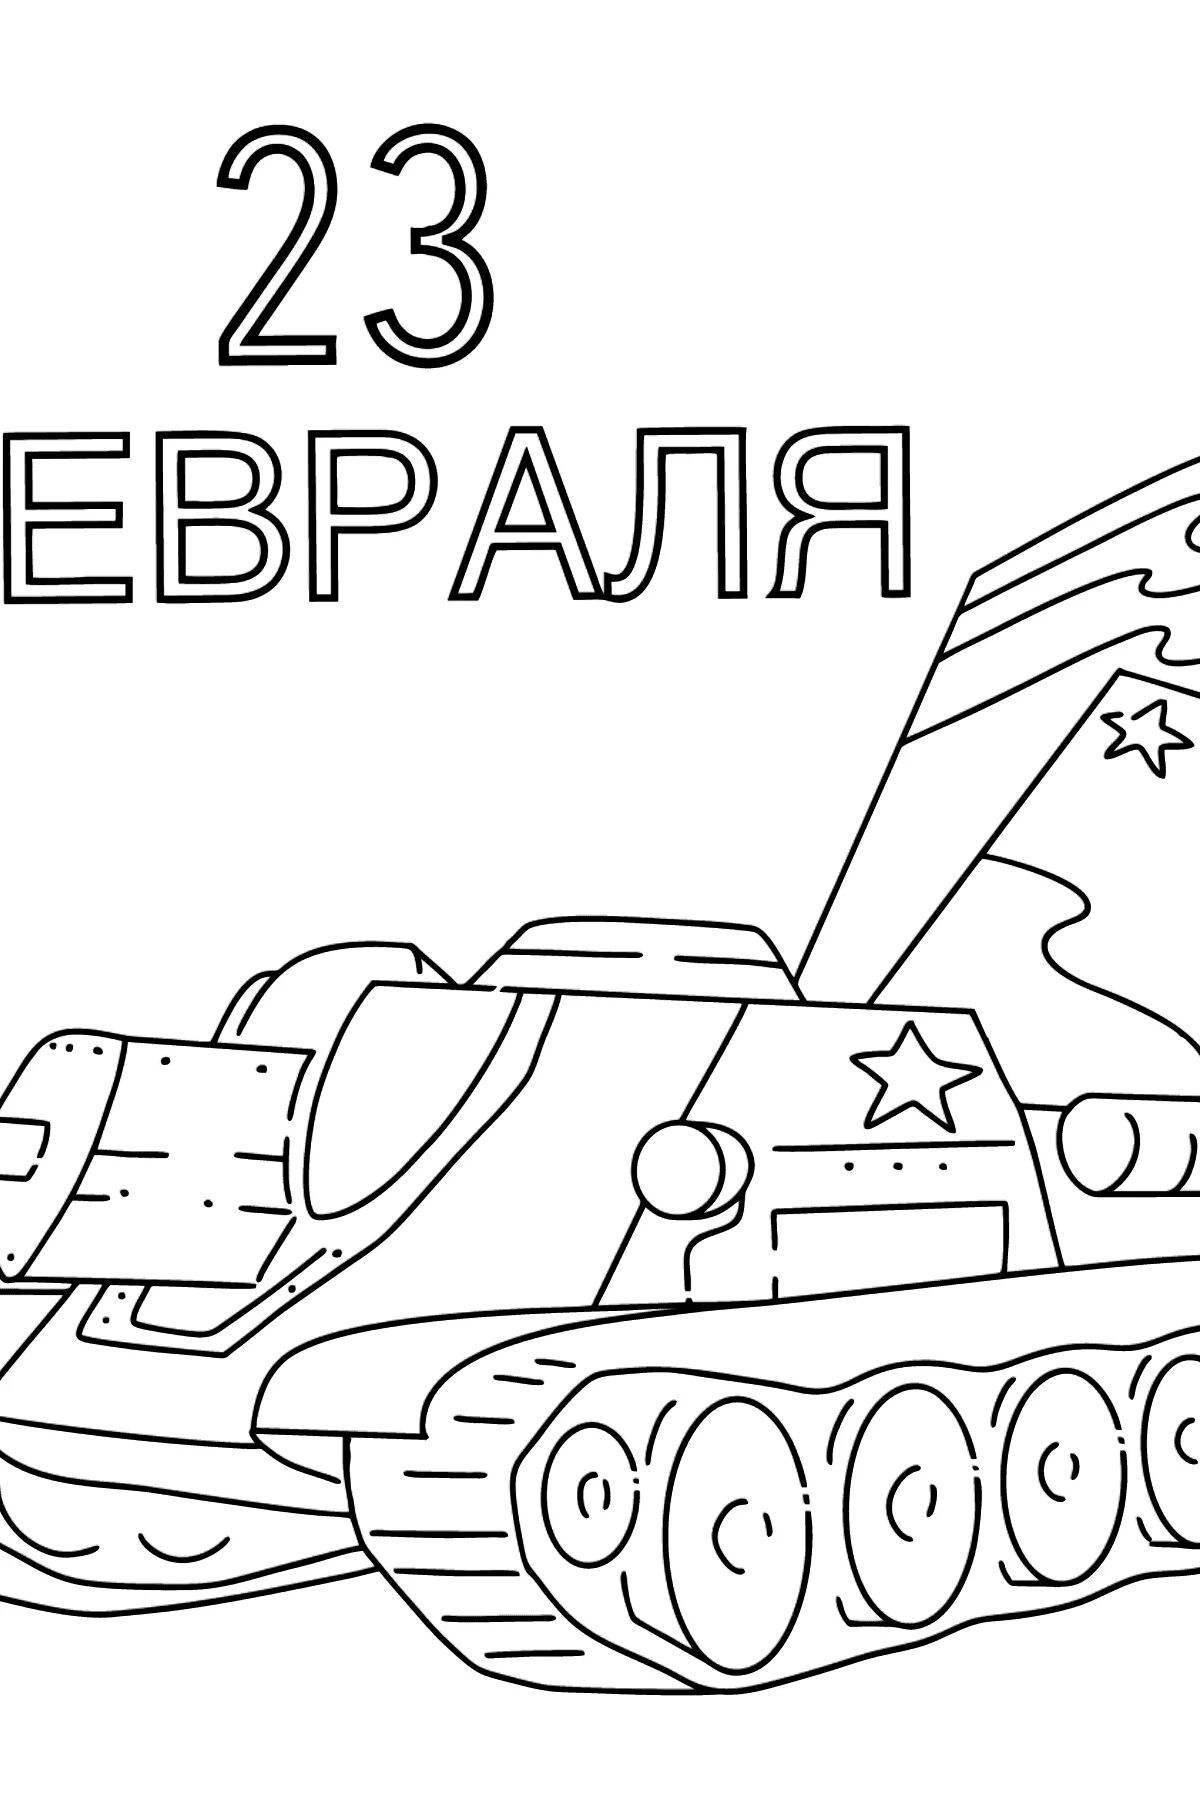 Bright tank coloring page